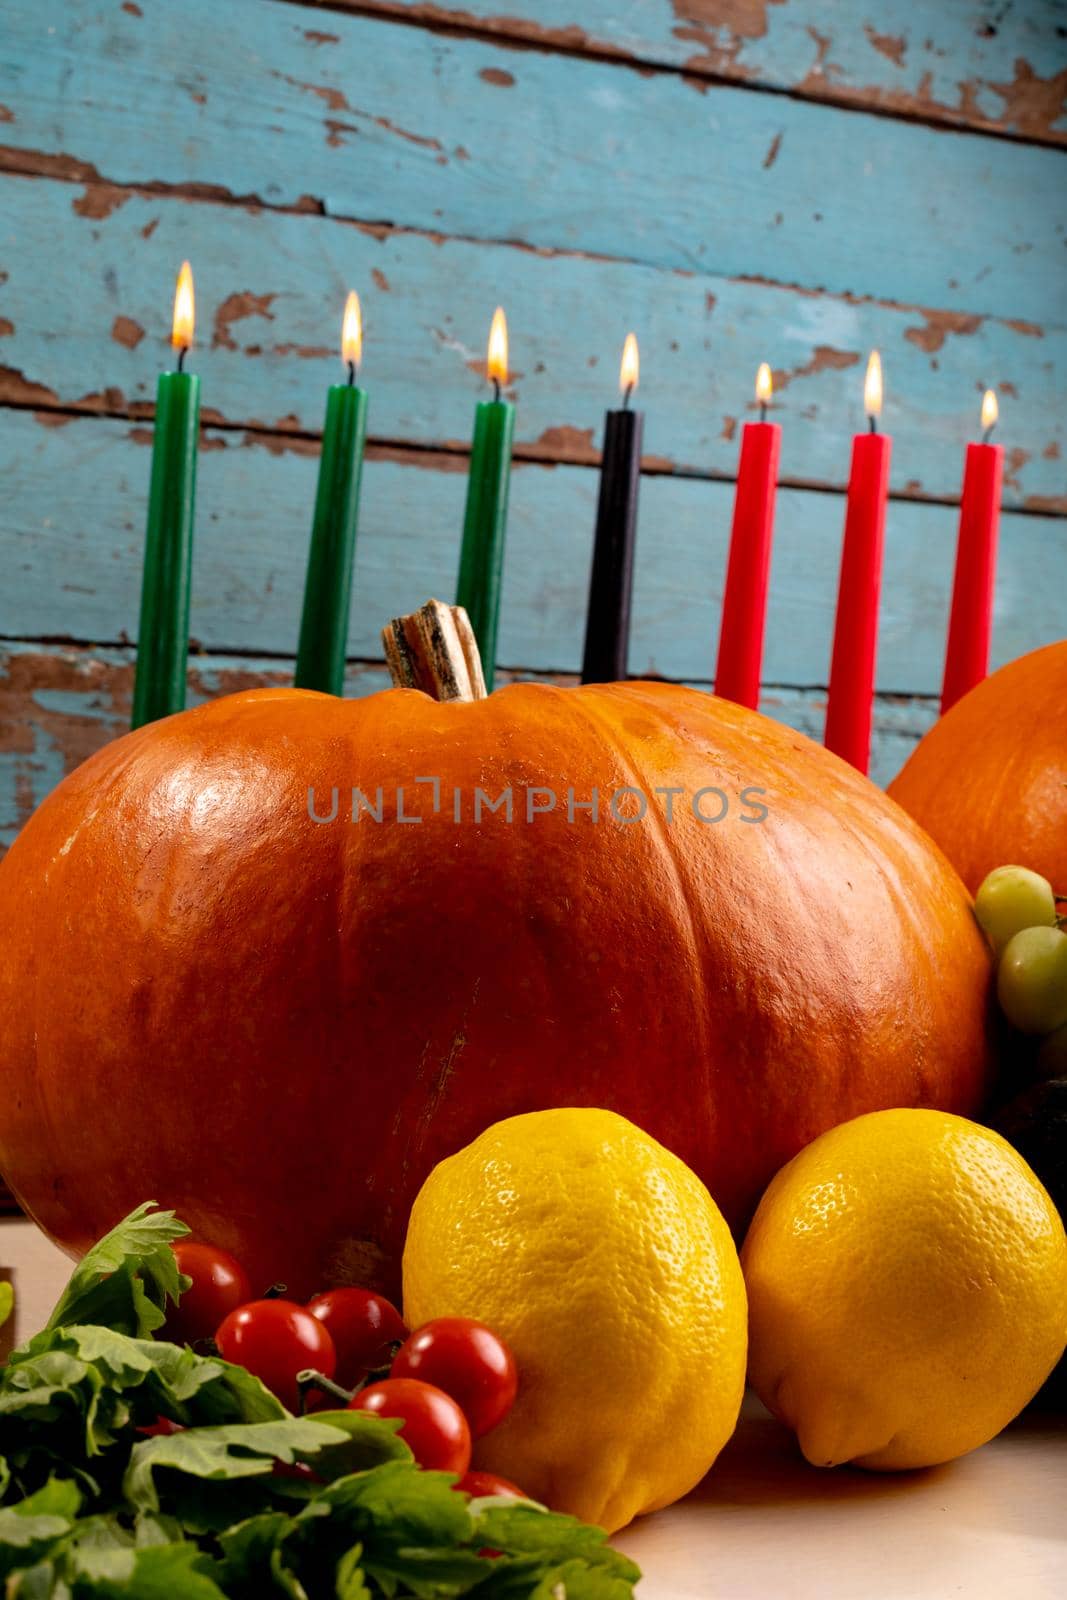 Composition of halloween decoration with candles and pumpkins on wooden background by Wavebreakmedia